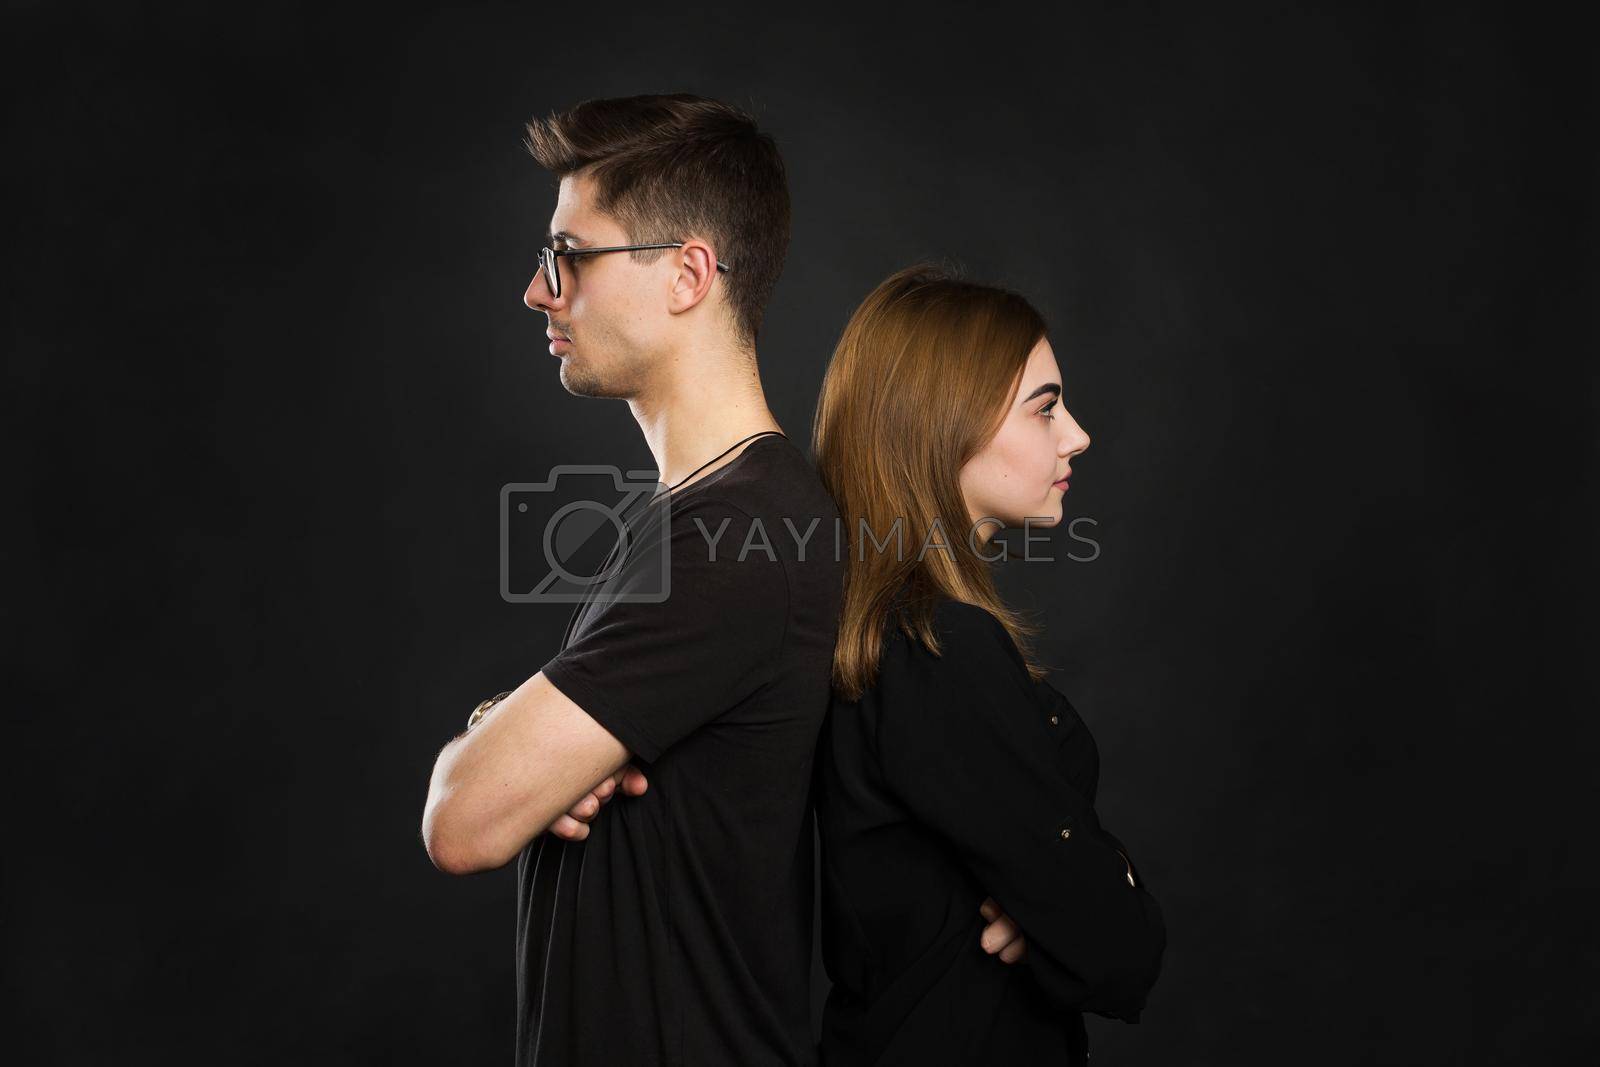 Royalty free image of Couple back to back not talking after an argument on black screen. by StudioPeace